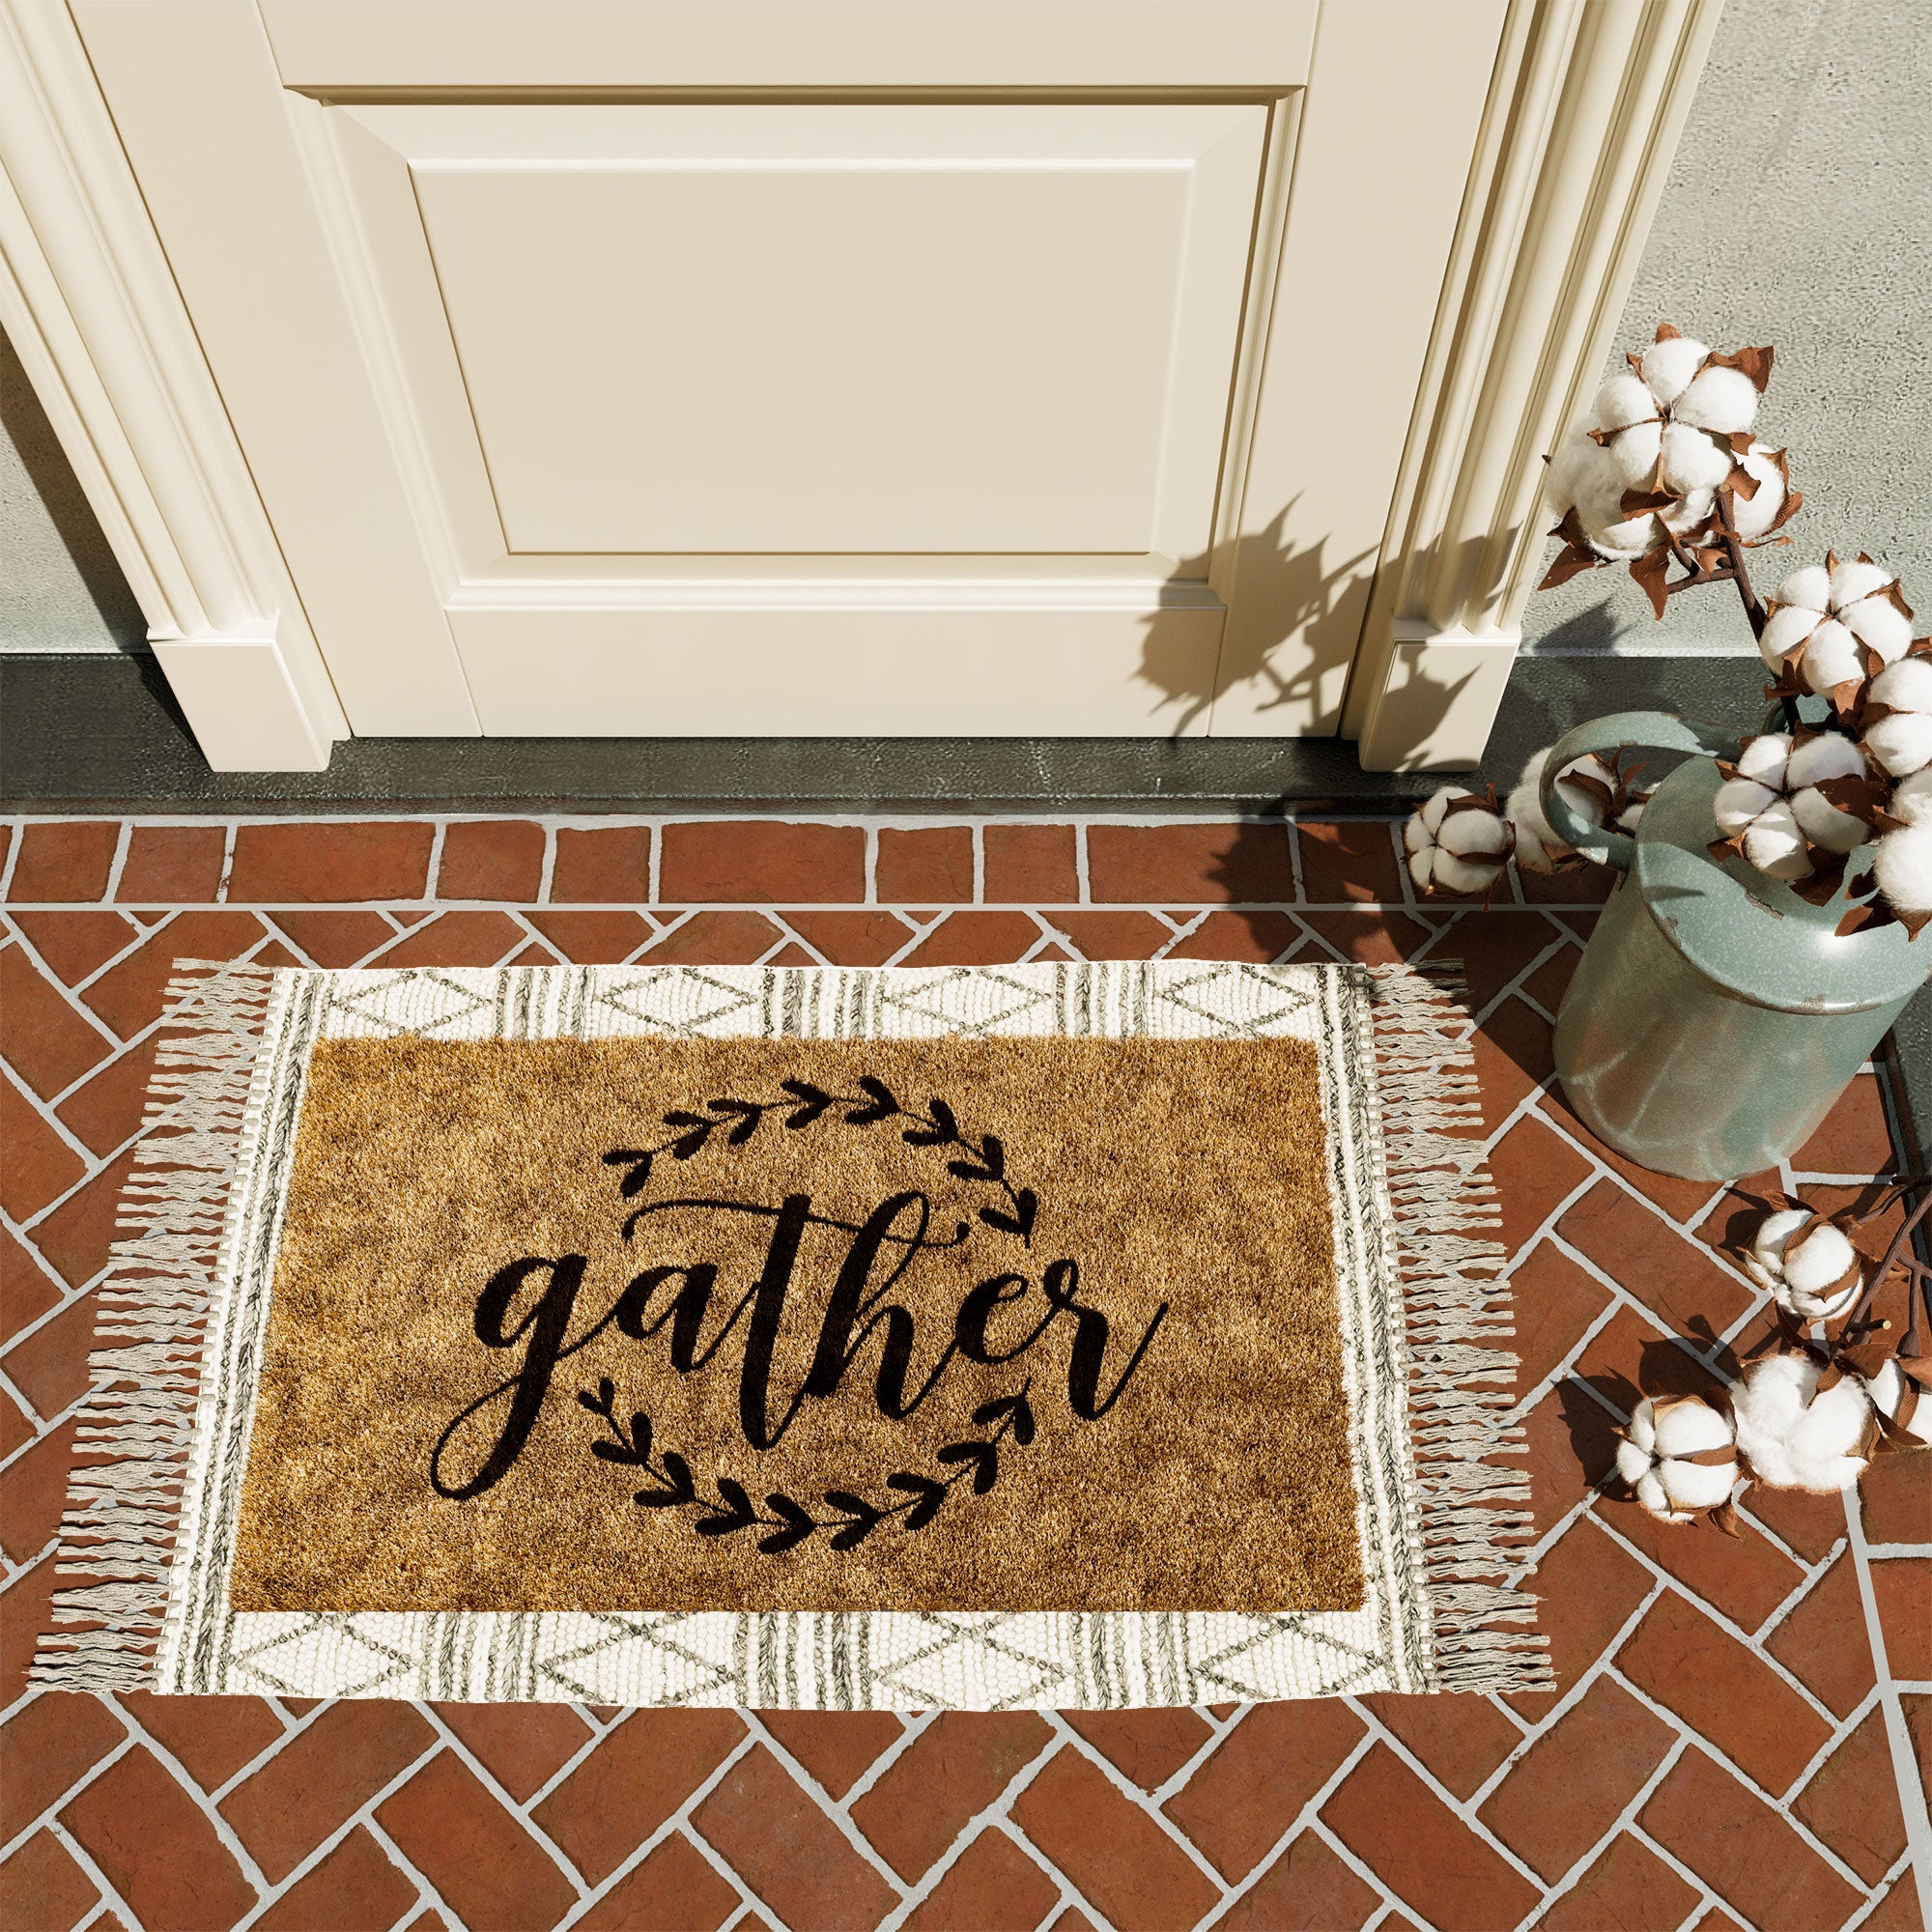 Barnyard Designs 'Gather' Doormat Welcome Mat for Outdoors, Large